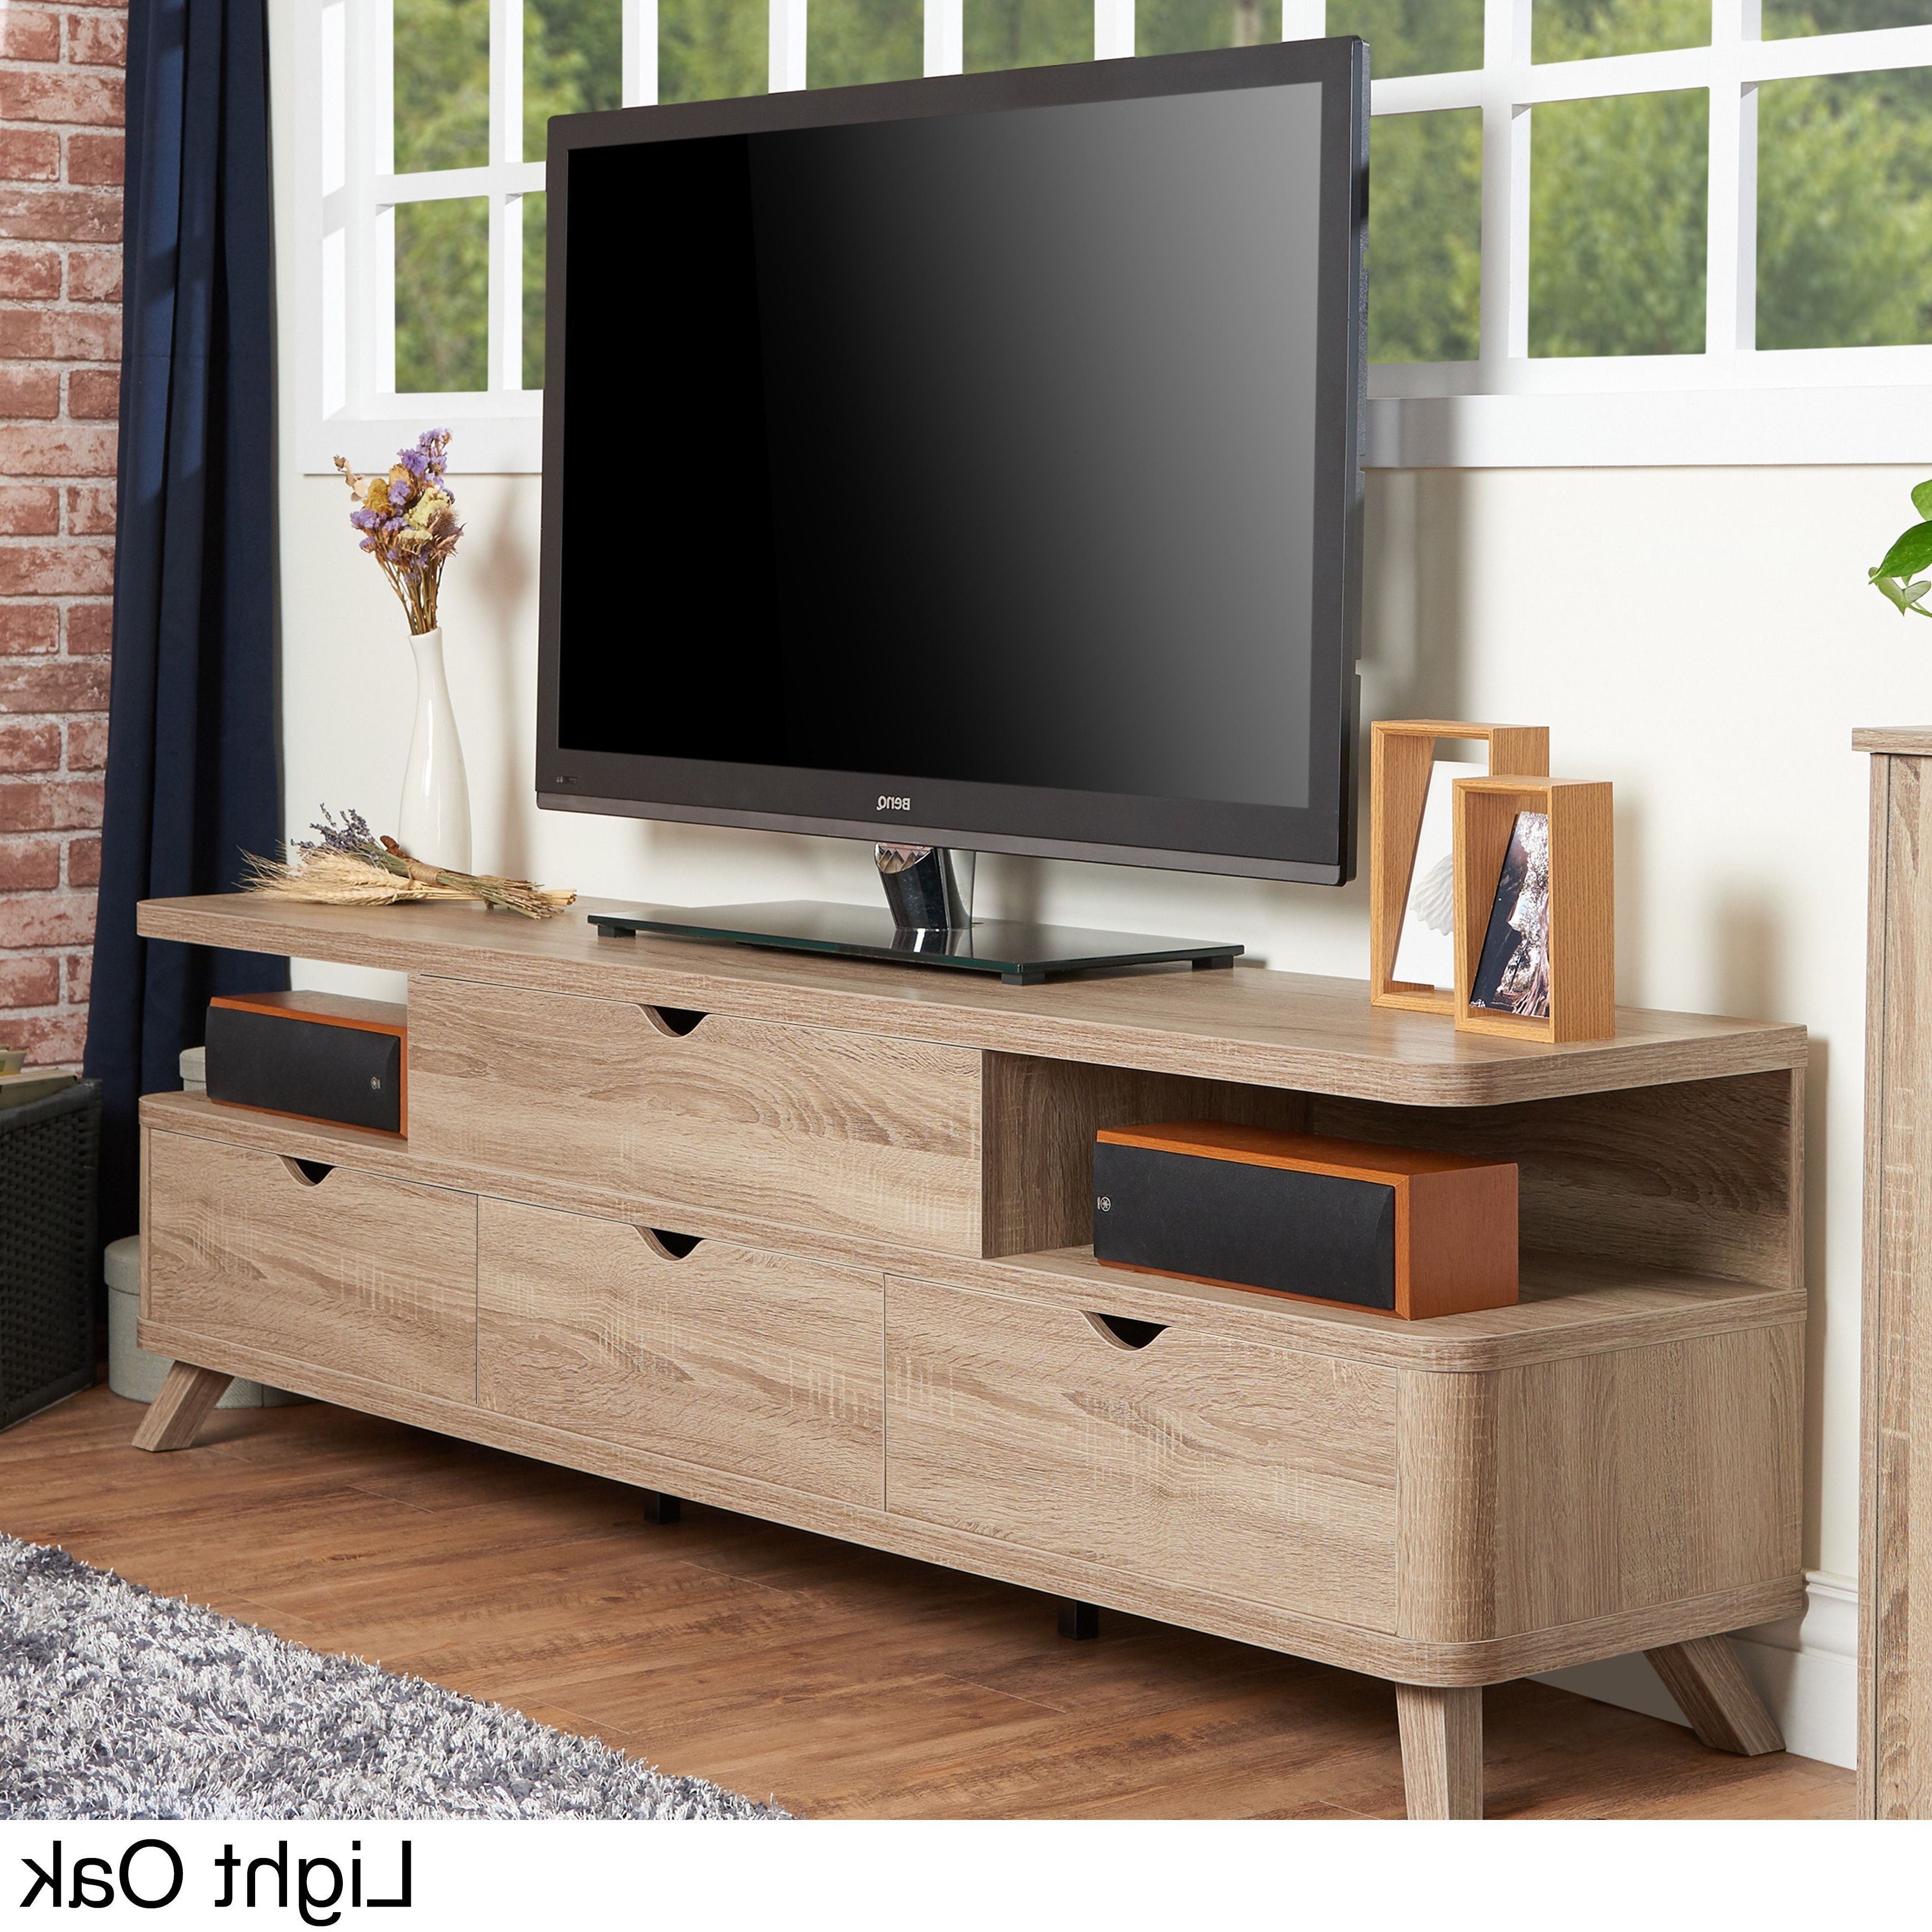 Most Recent With Its Flared Legs And Rounded Corners, This Tv Stand Adds Pertaining To Tv Stands With Rounded Corners (View 13 of 20)